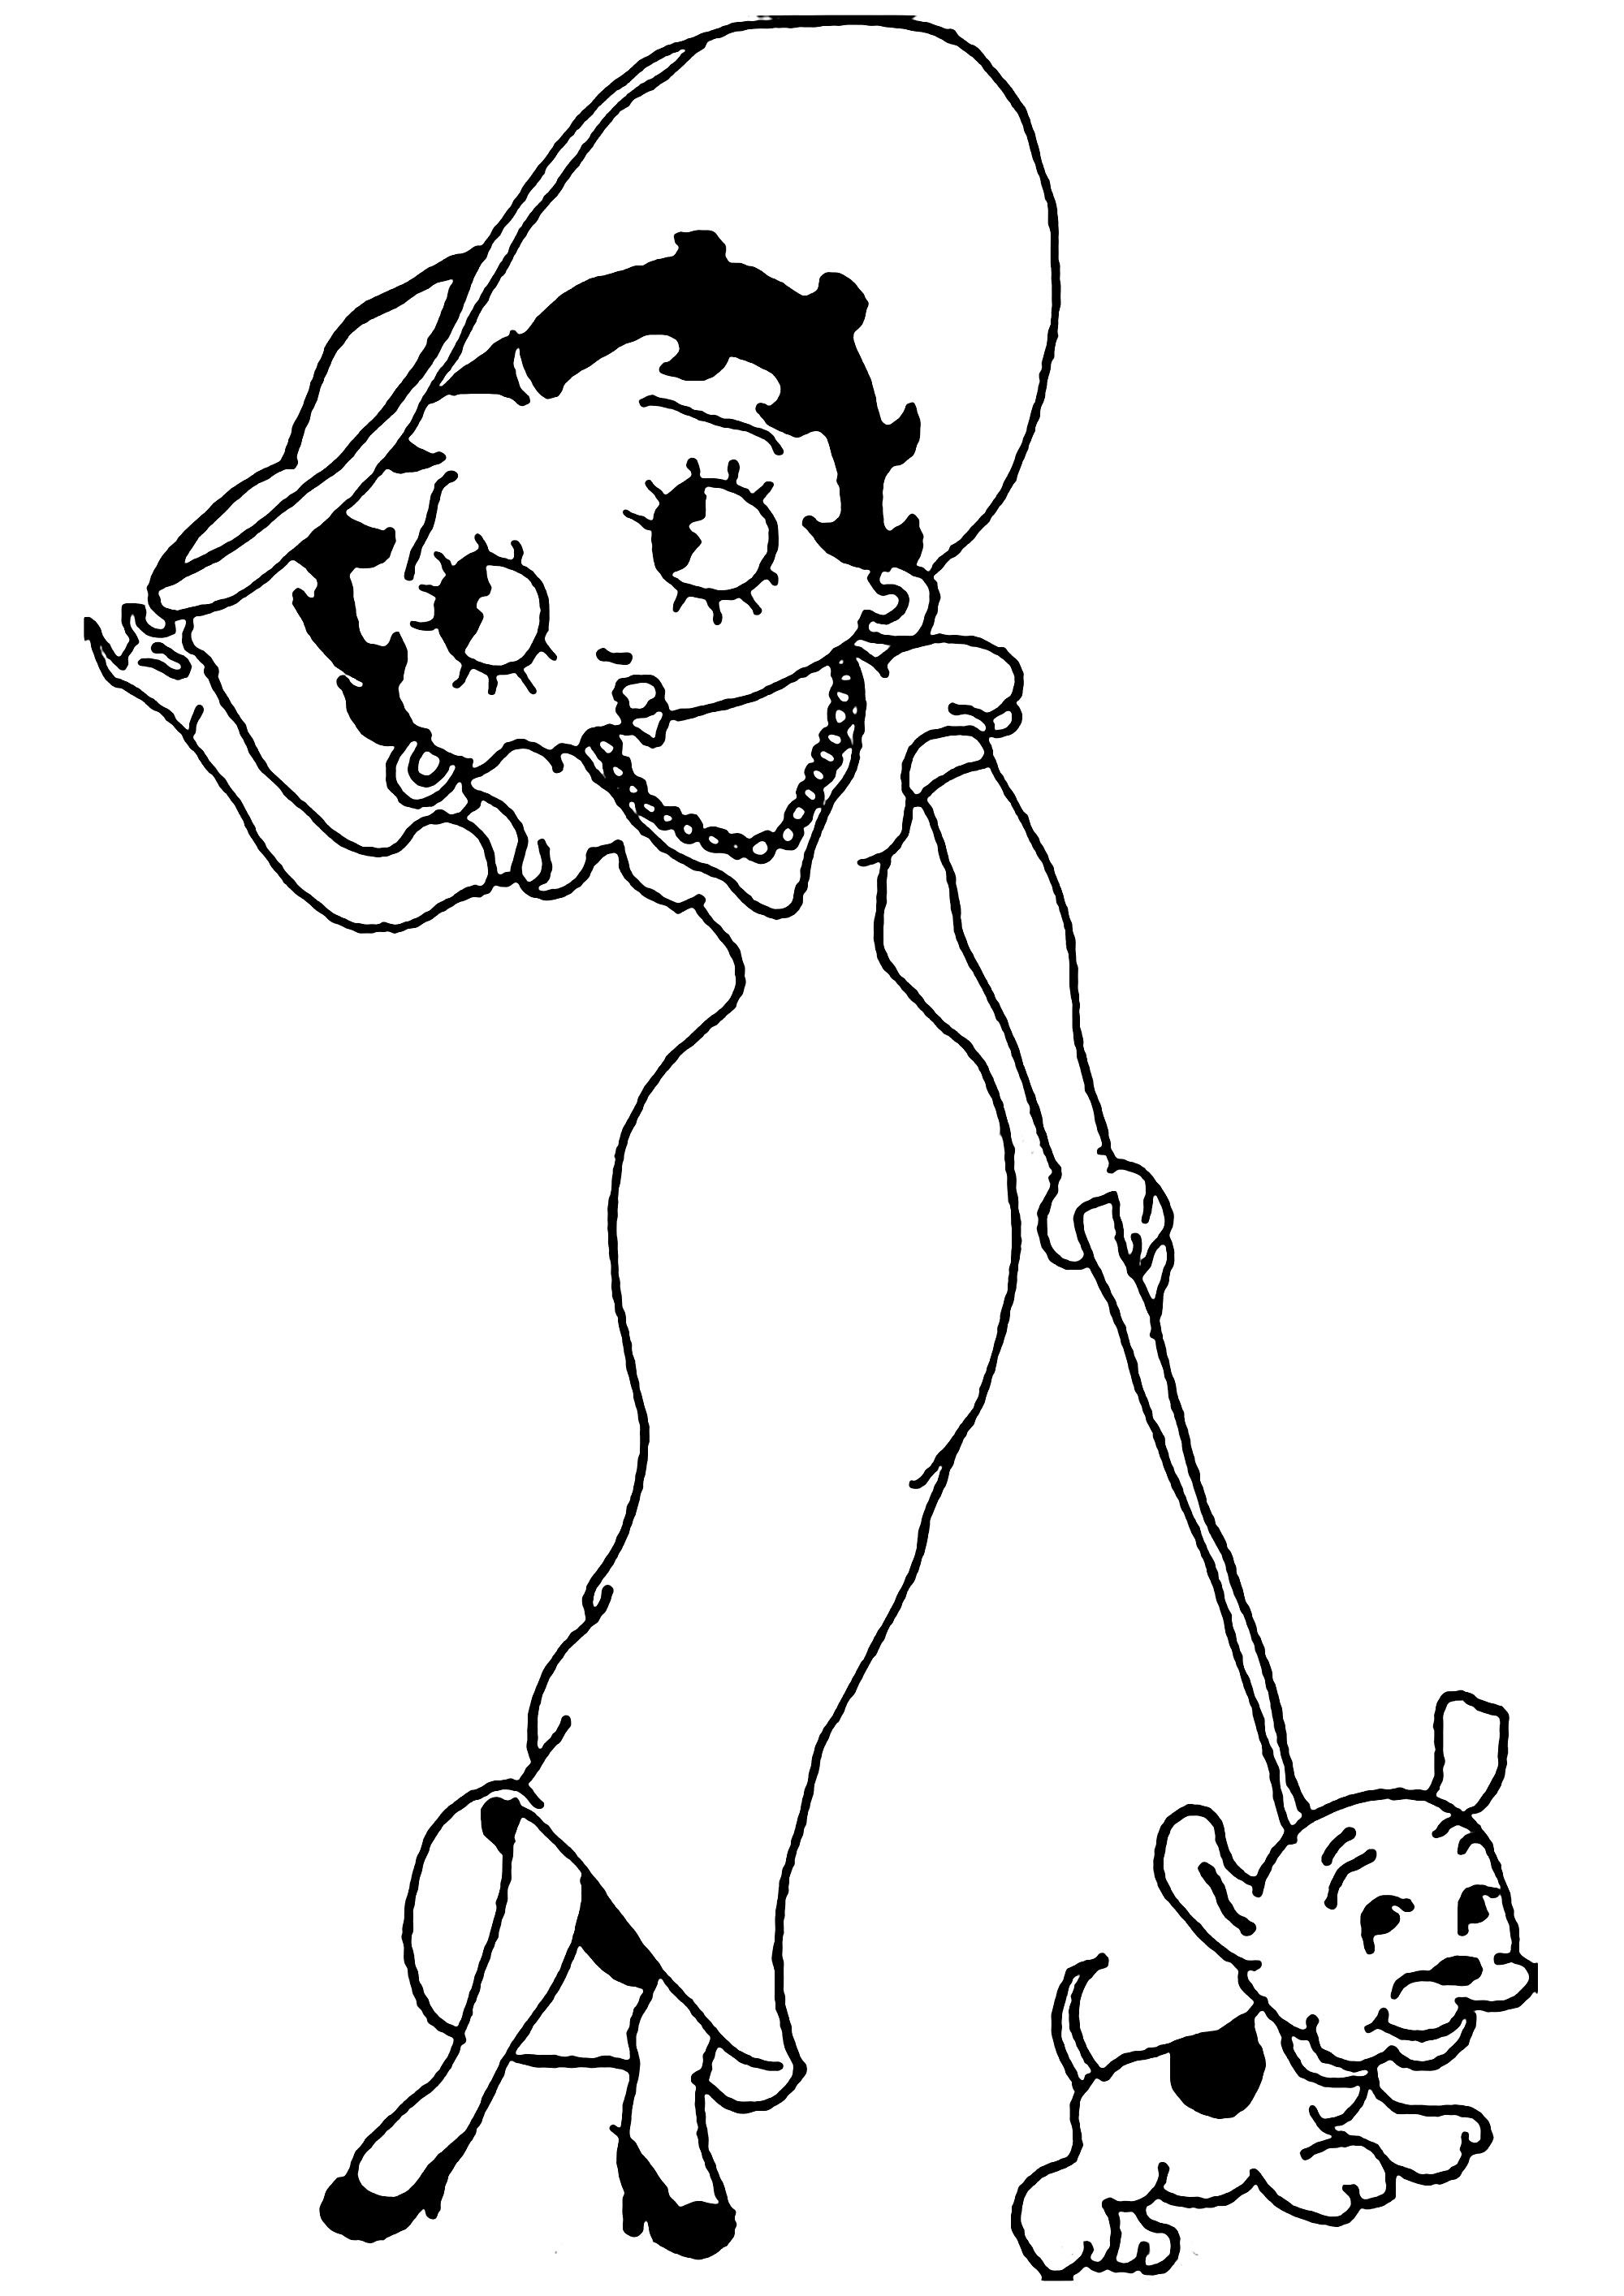 betty-boop-coloring-pages-betty-boop-cartoon-cartoon-coloring-pages